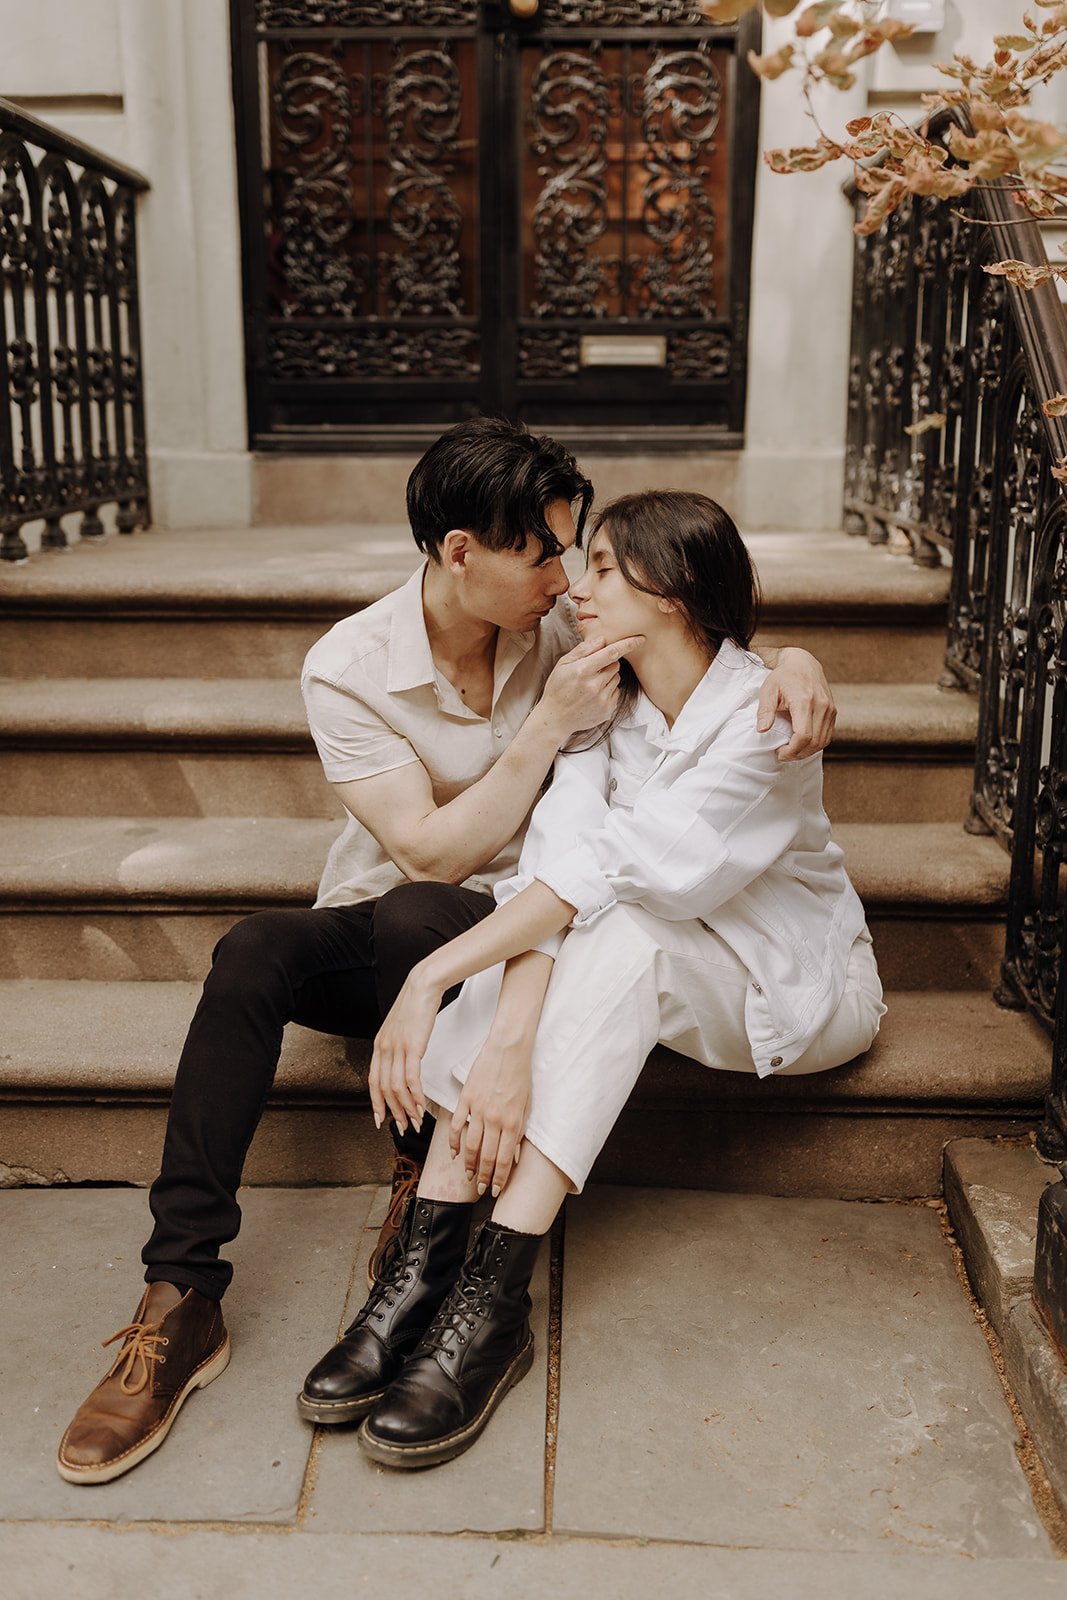 Couple kissing on the stoop during New York City engagement photos